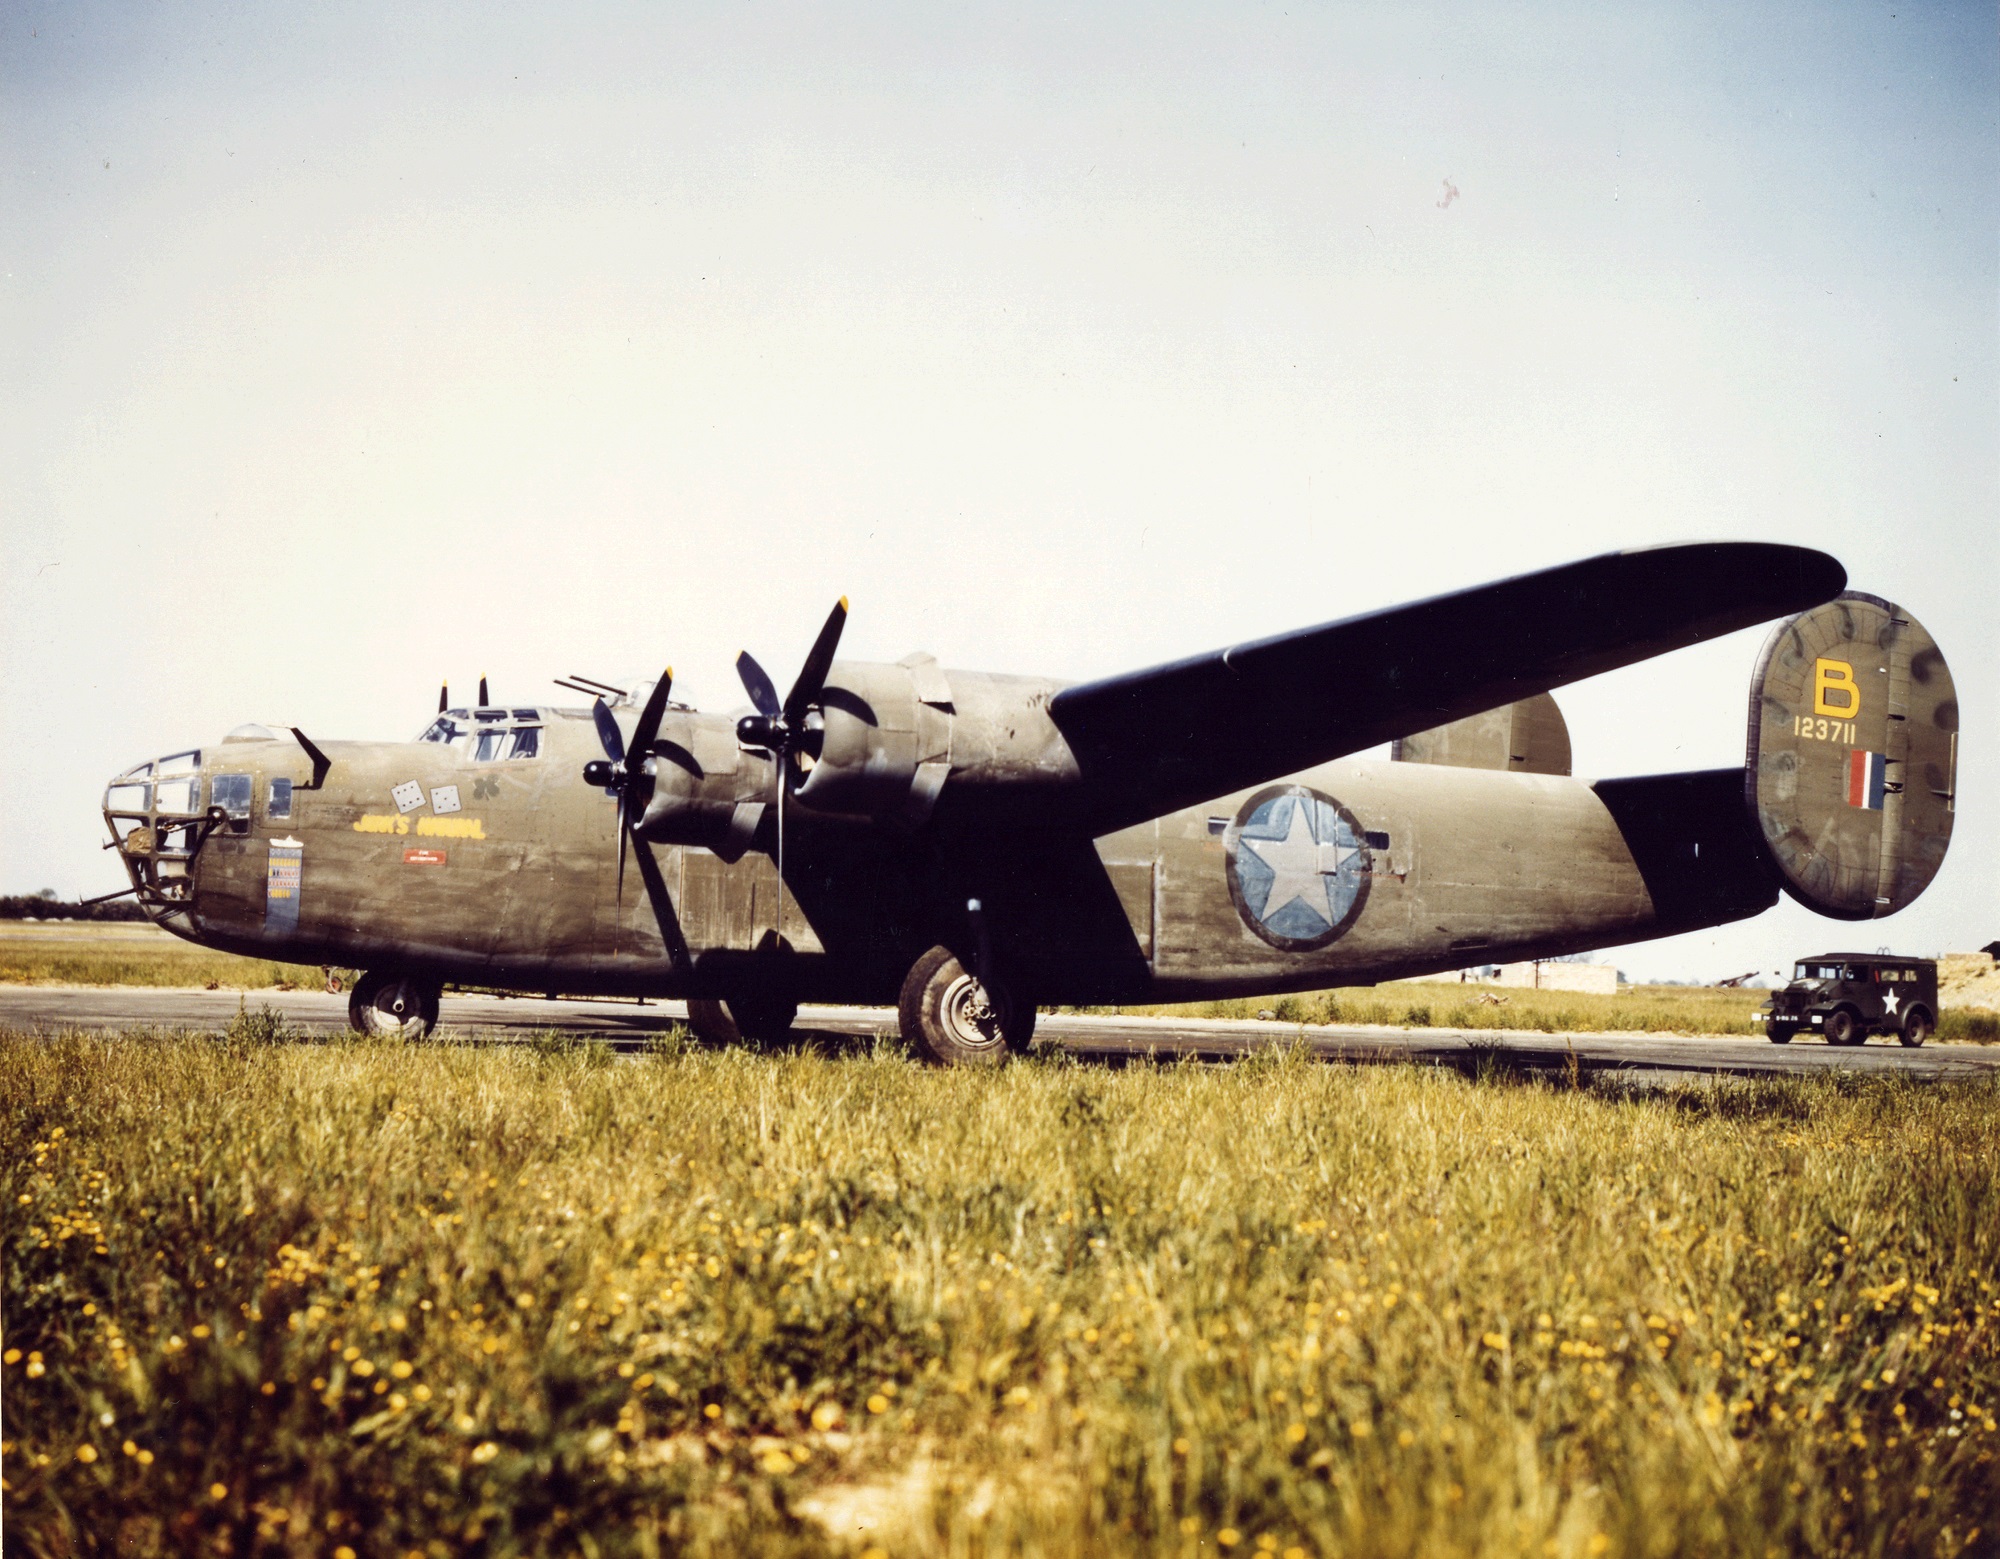 View of a Consolidated B-24 Liberator heavy bomber (from the 8th Air Force), nicknamed 'Jerk's Natural,' parked on the tarmac, England, 1940s. (Photo by PhotoQuest/Getty Images)